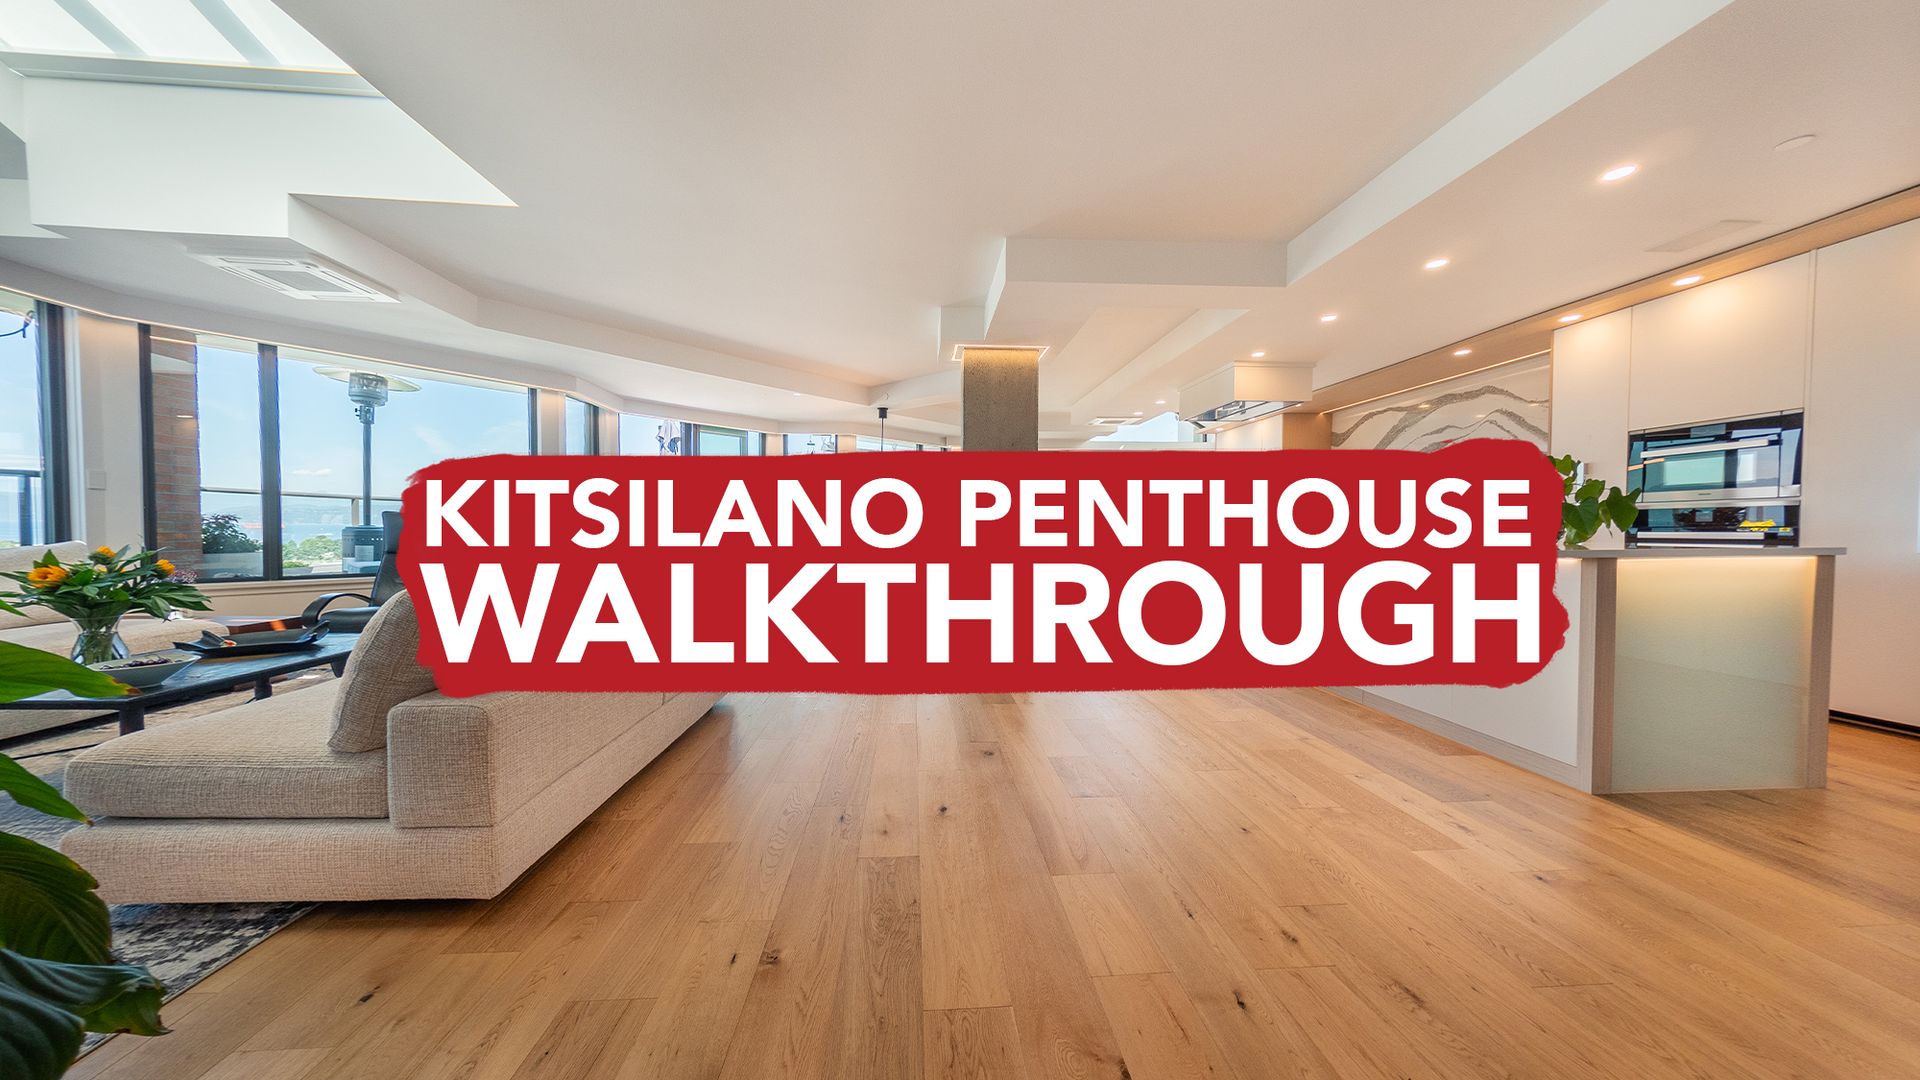 An image of a penthouse condo in Vancouver with the title of Kitsilano Penthouse